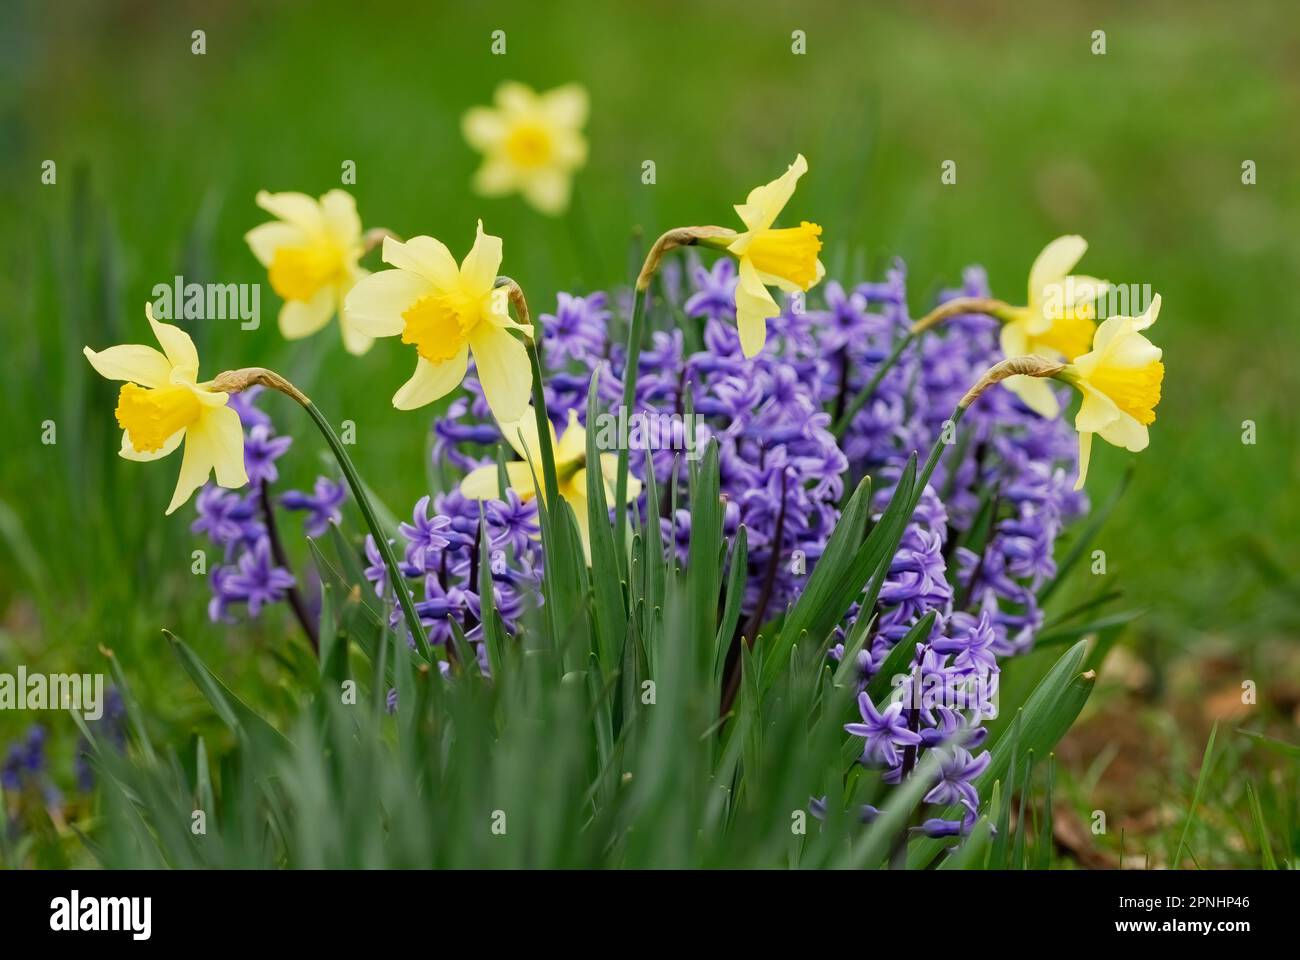 Daffodil, narcissus  with hyacinth flowers, hyacinthus orientalis in the front garden, closeup Trencin, Slovakia Stock Photo